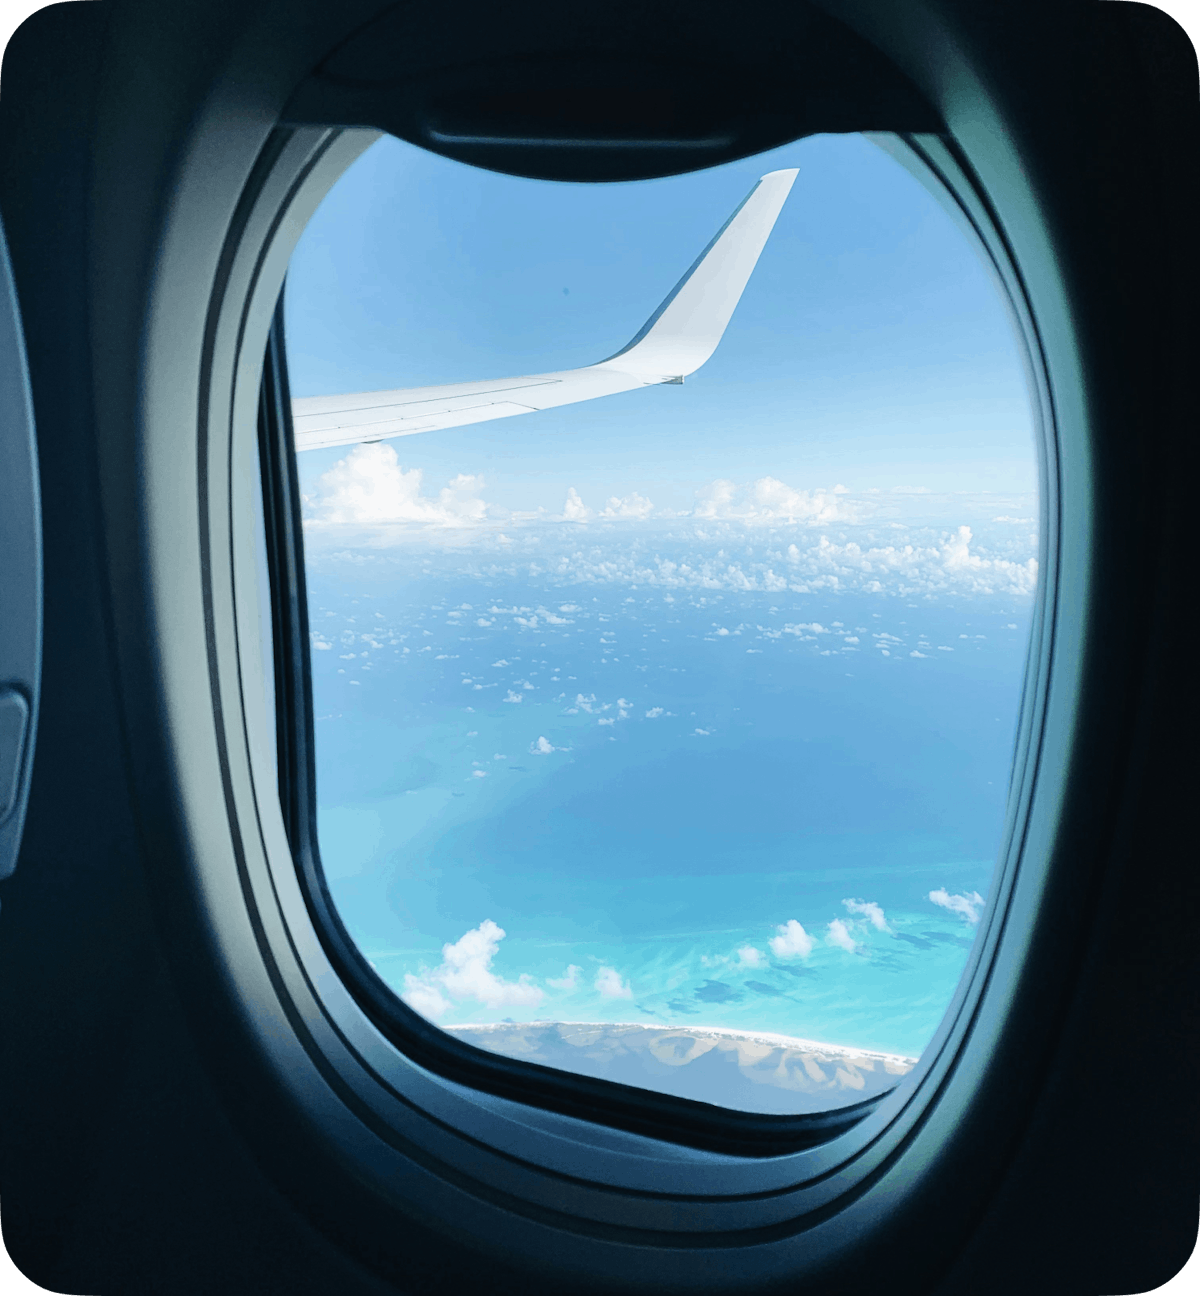 Sea view from a plane window 